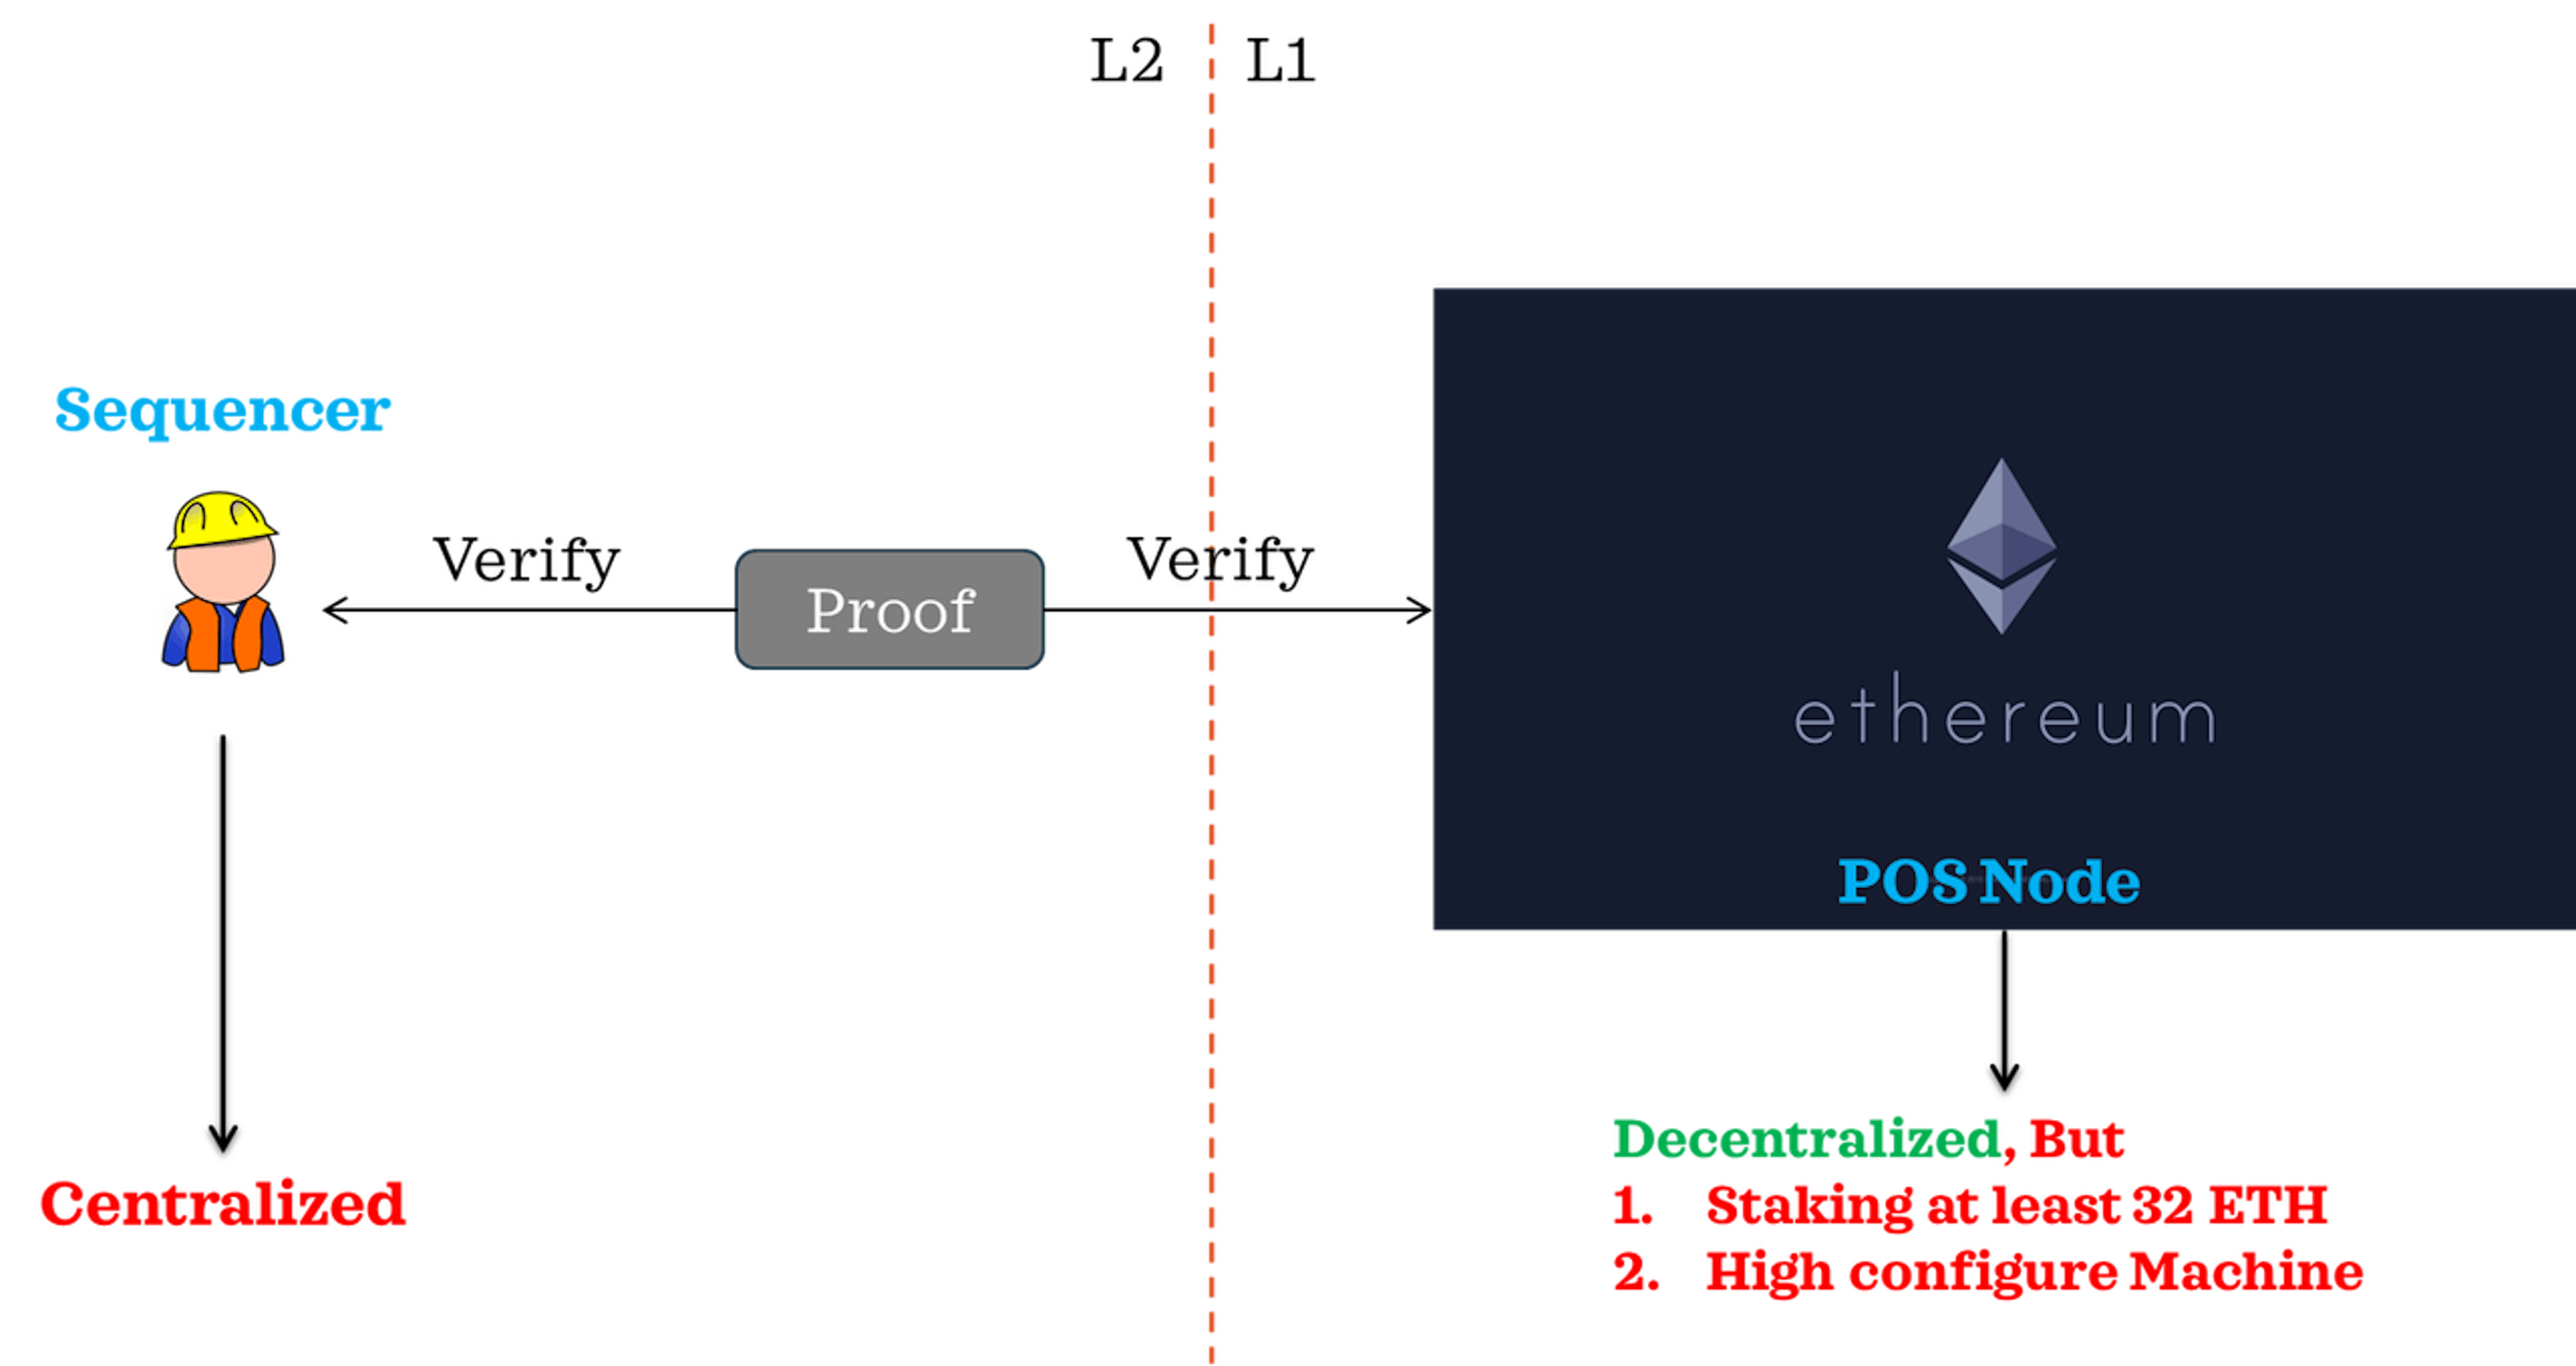 Fig3. The progress of verifying proof in L2